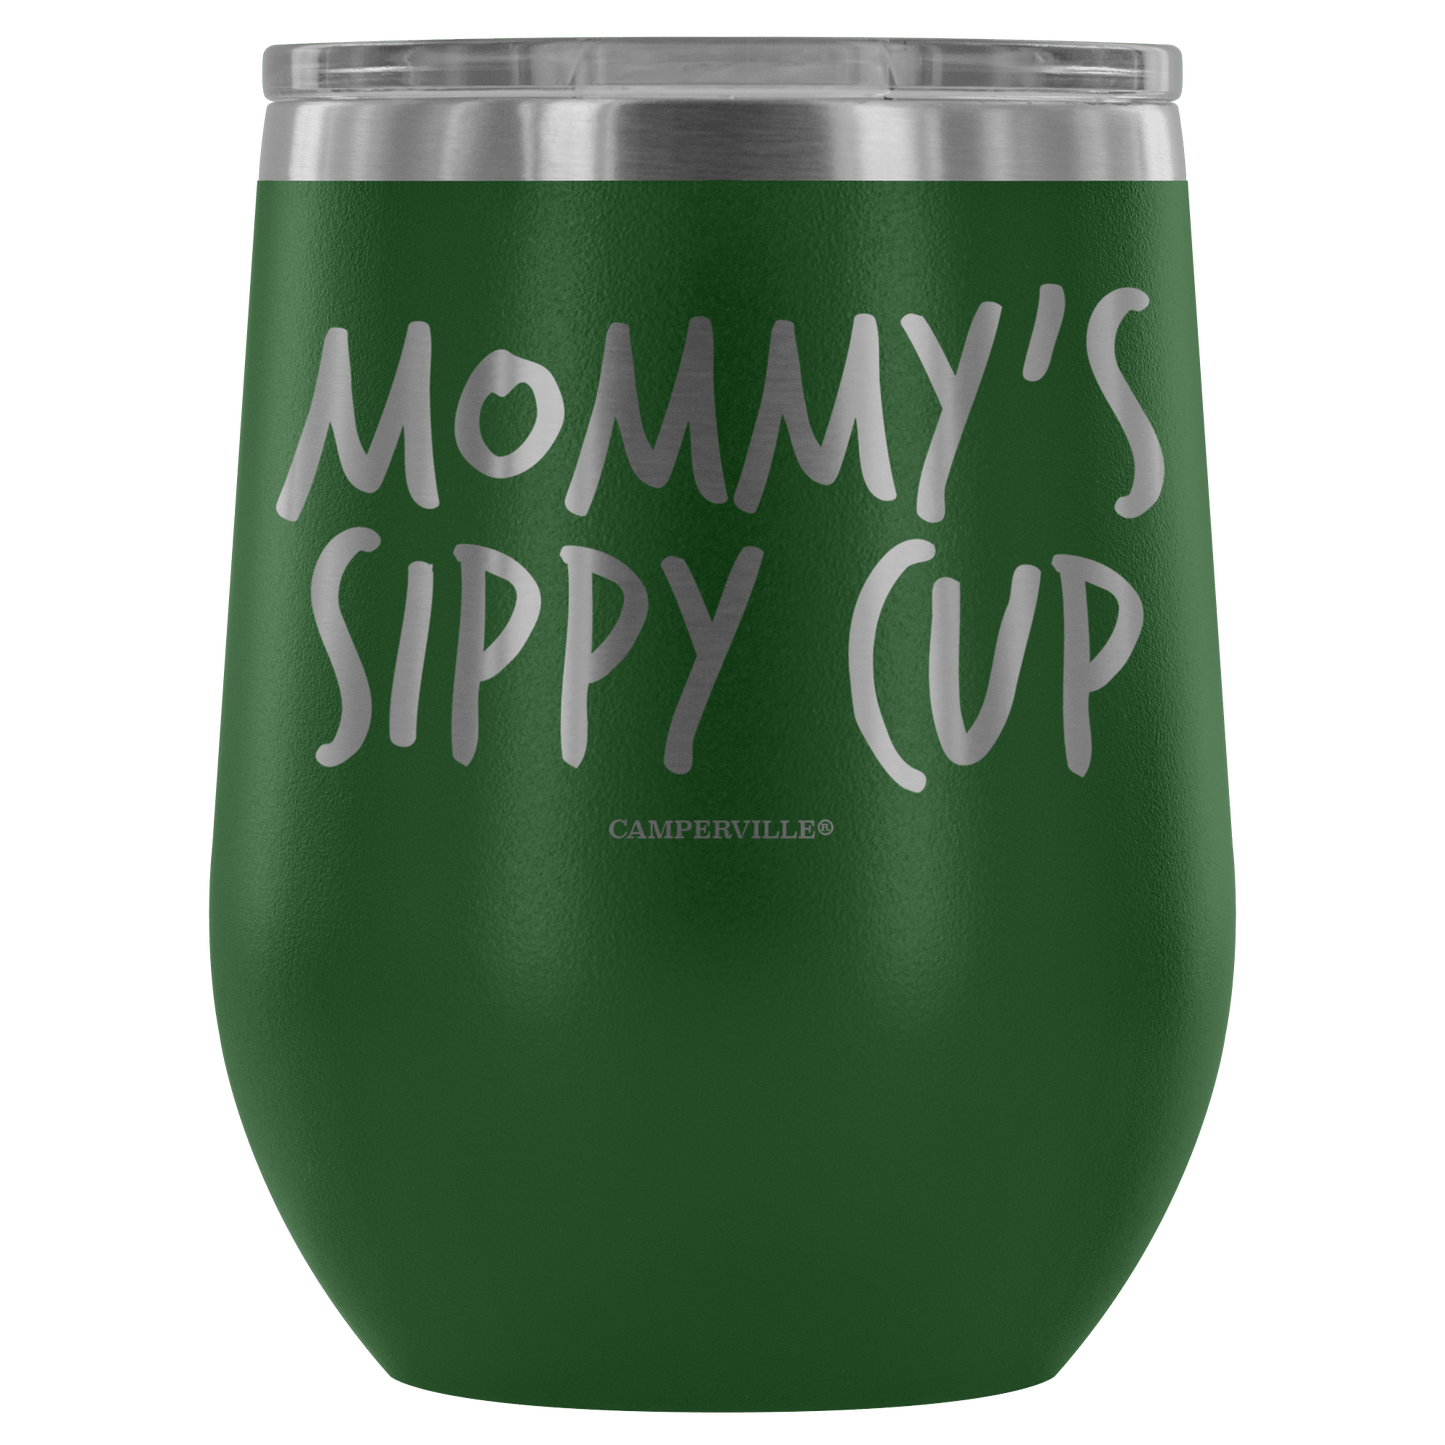 "Mommy's Sippy Cup" - Stemless Wine Cup